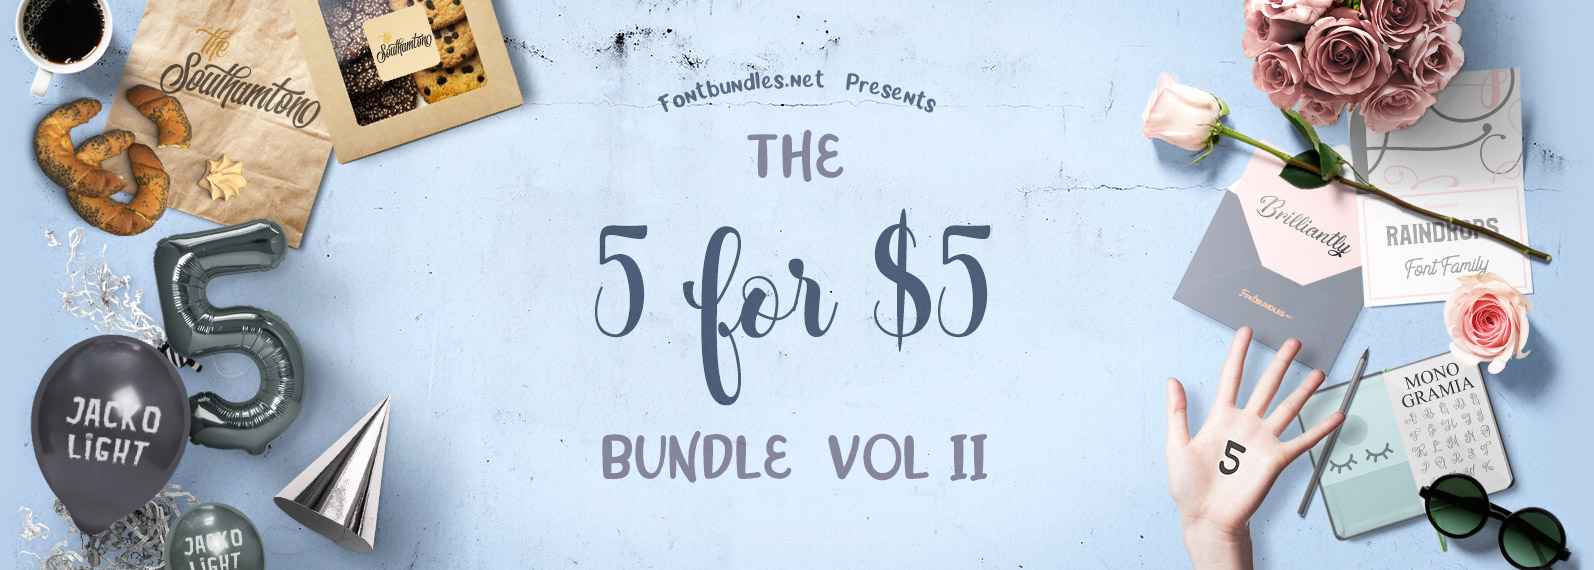 5 for 5 Bundle Volume II Cover